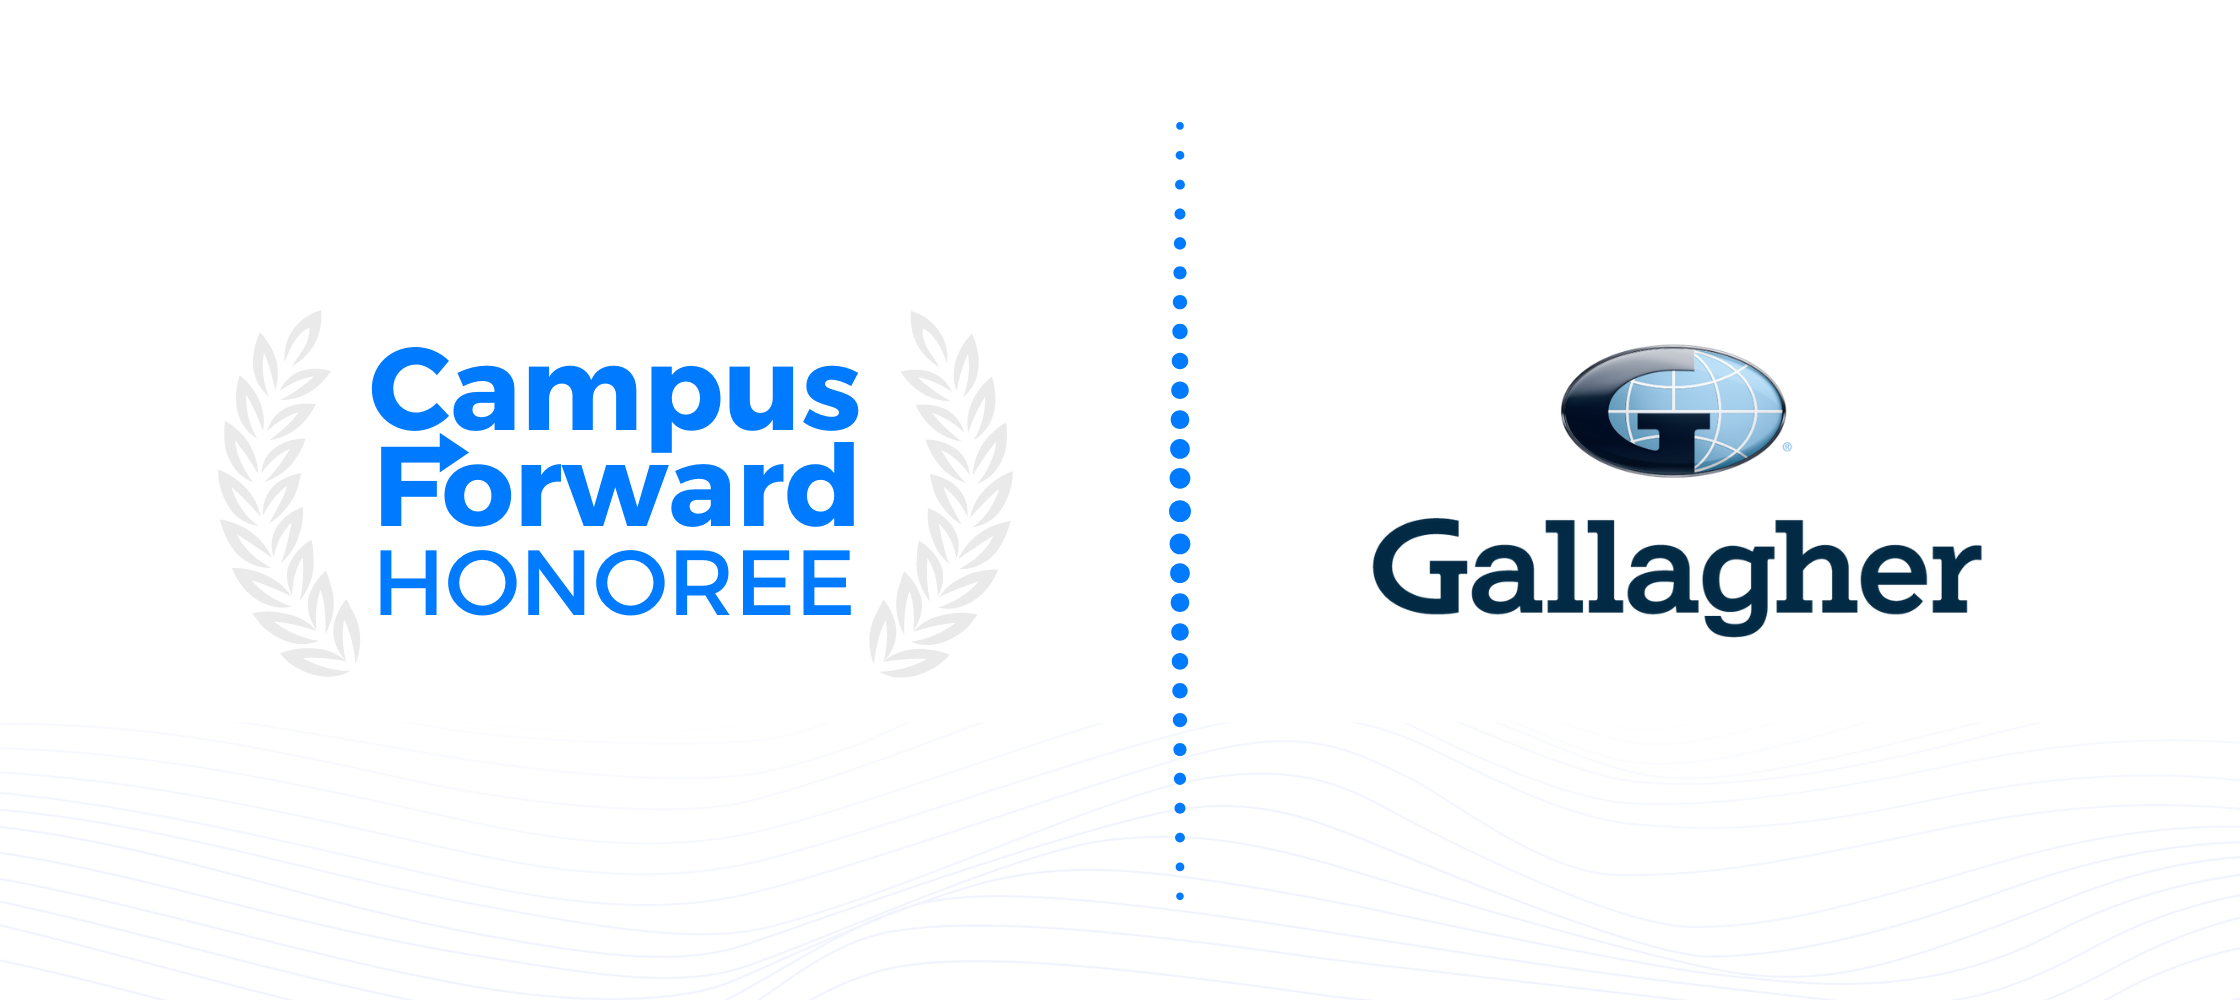 Campus Forward Honoree - Gallagher